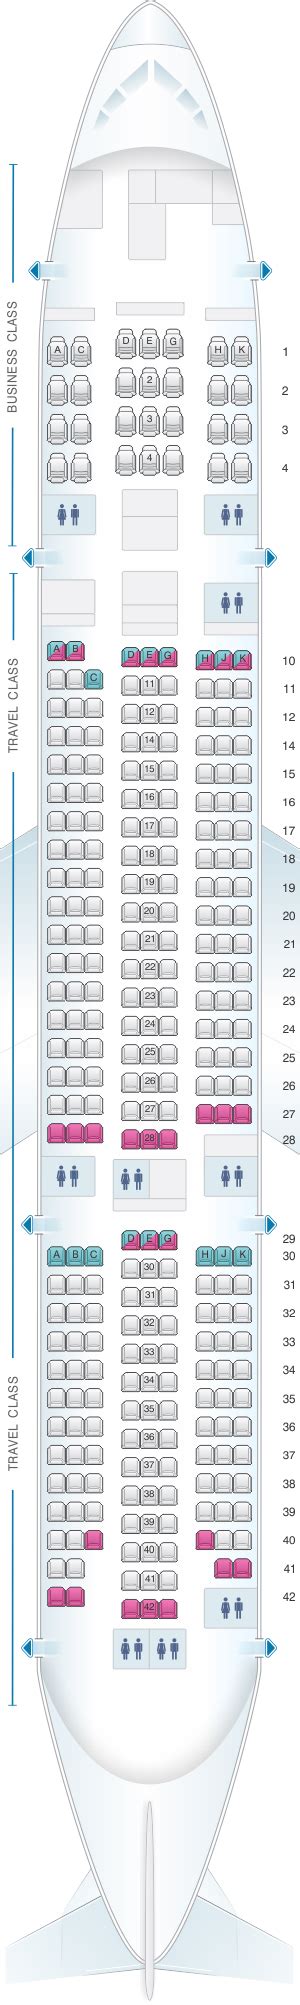 Seat Map Asiana Airlines Boeing B777 200er 300pax V1 Seatmaestro